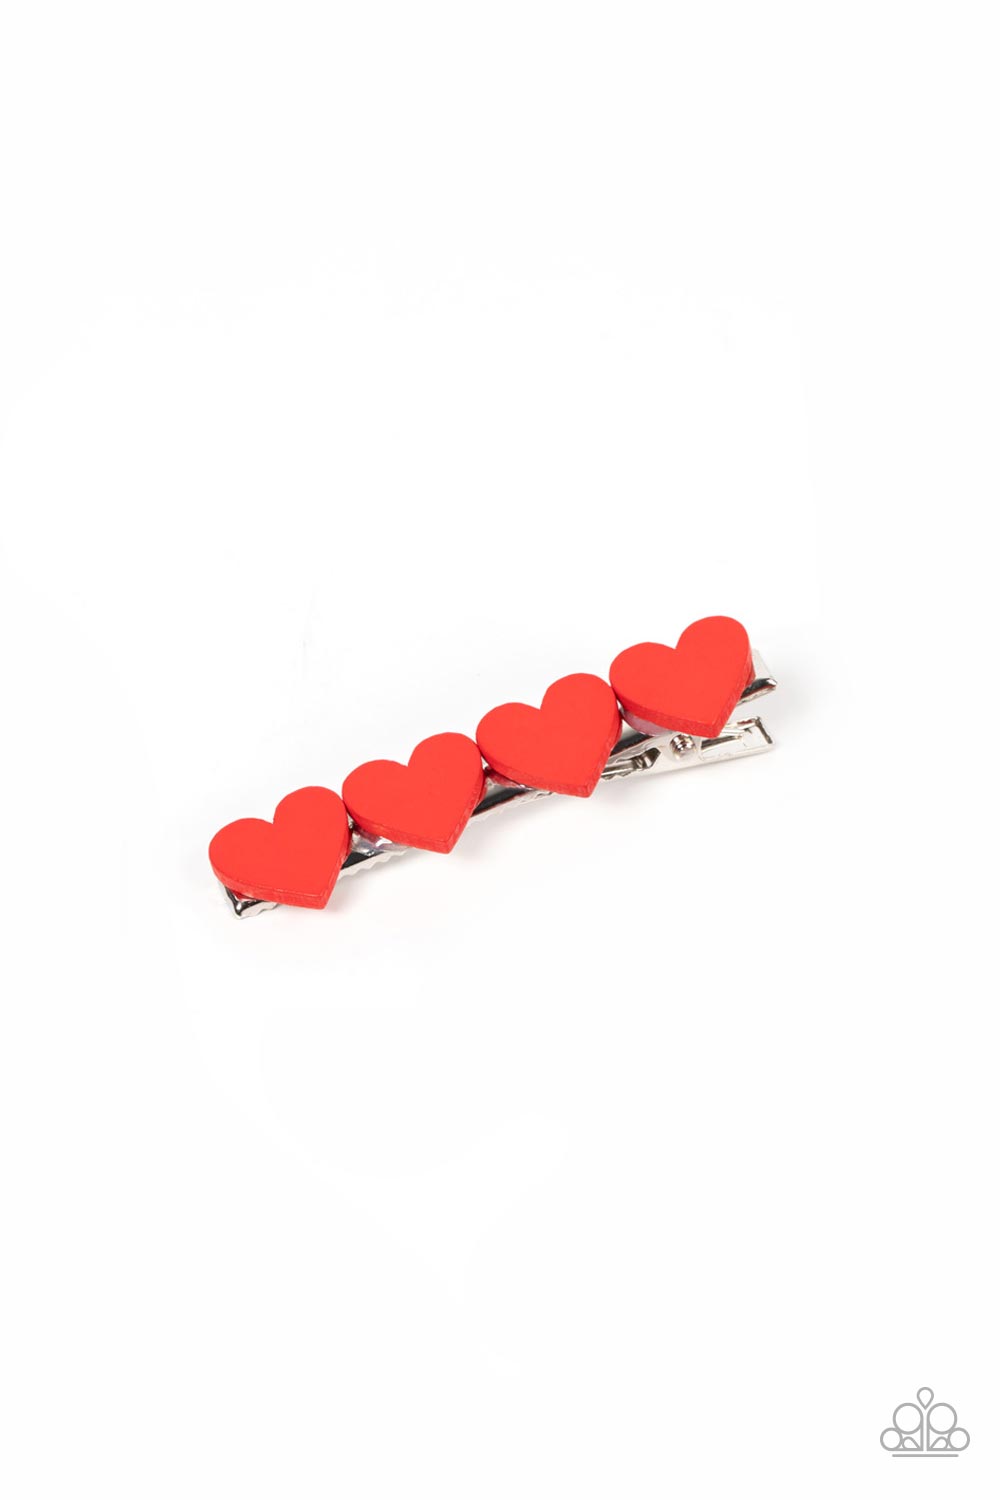 Sending You Love - Red Hair Clip - Sharon’s Southern Bling 